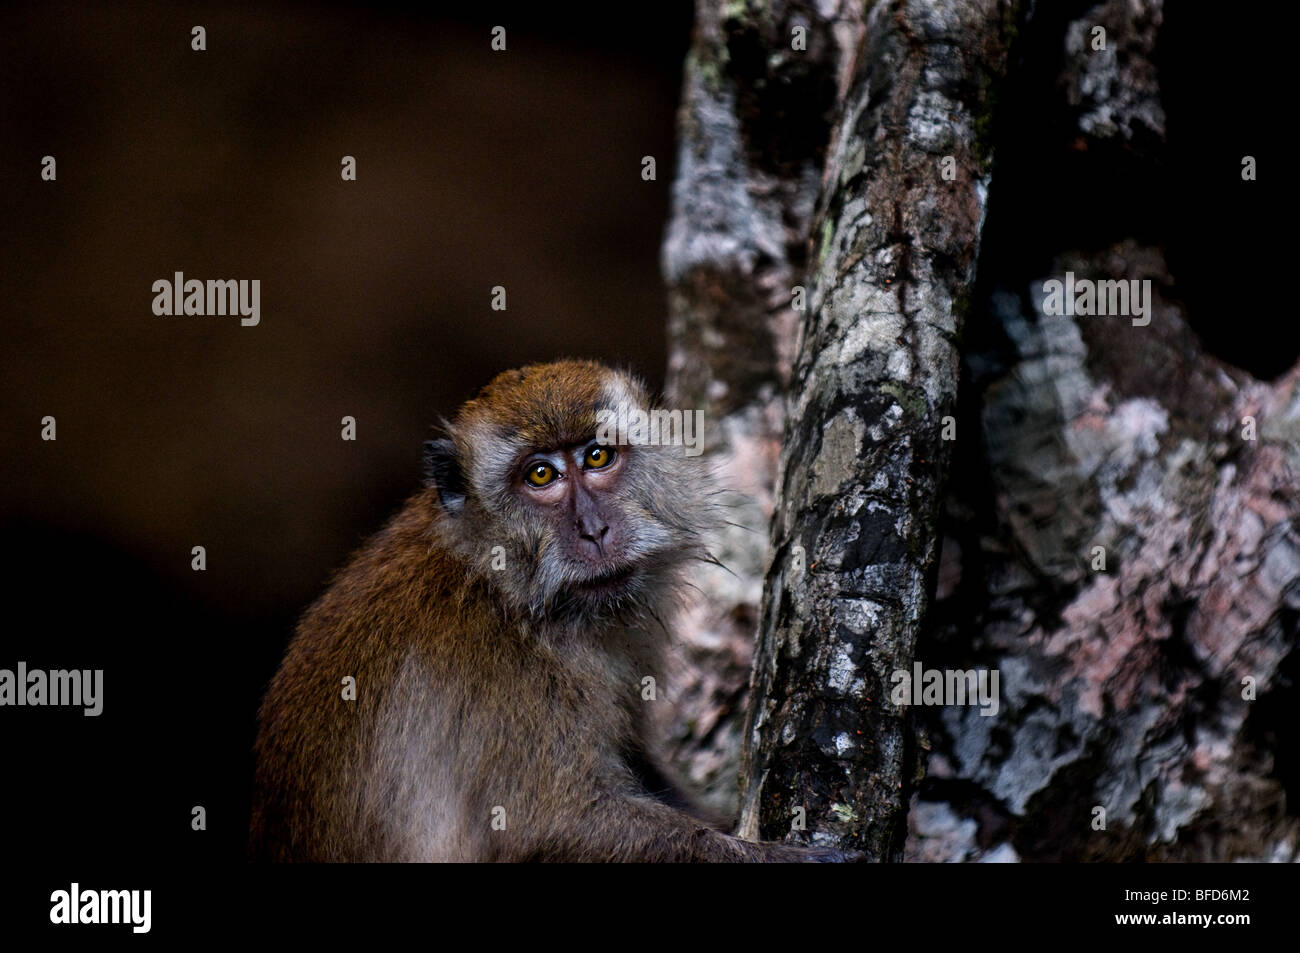 Long-tailed or Crab-eating Macaque. Stock Photo